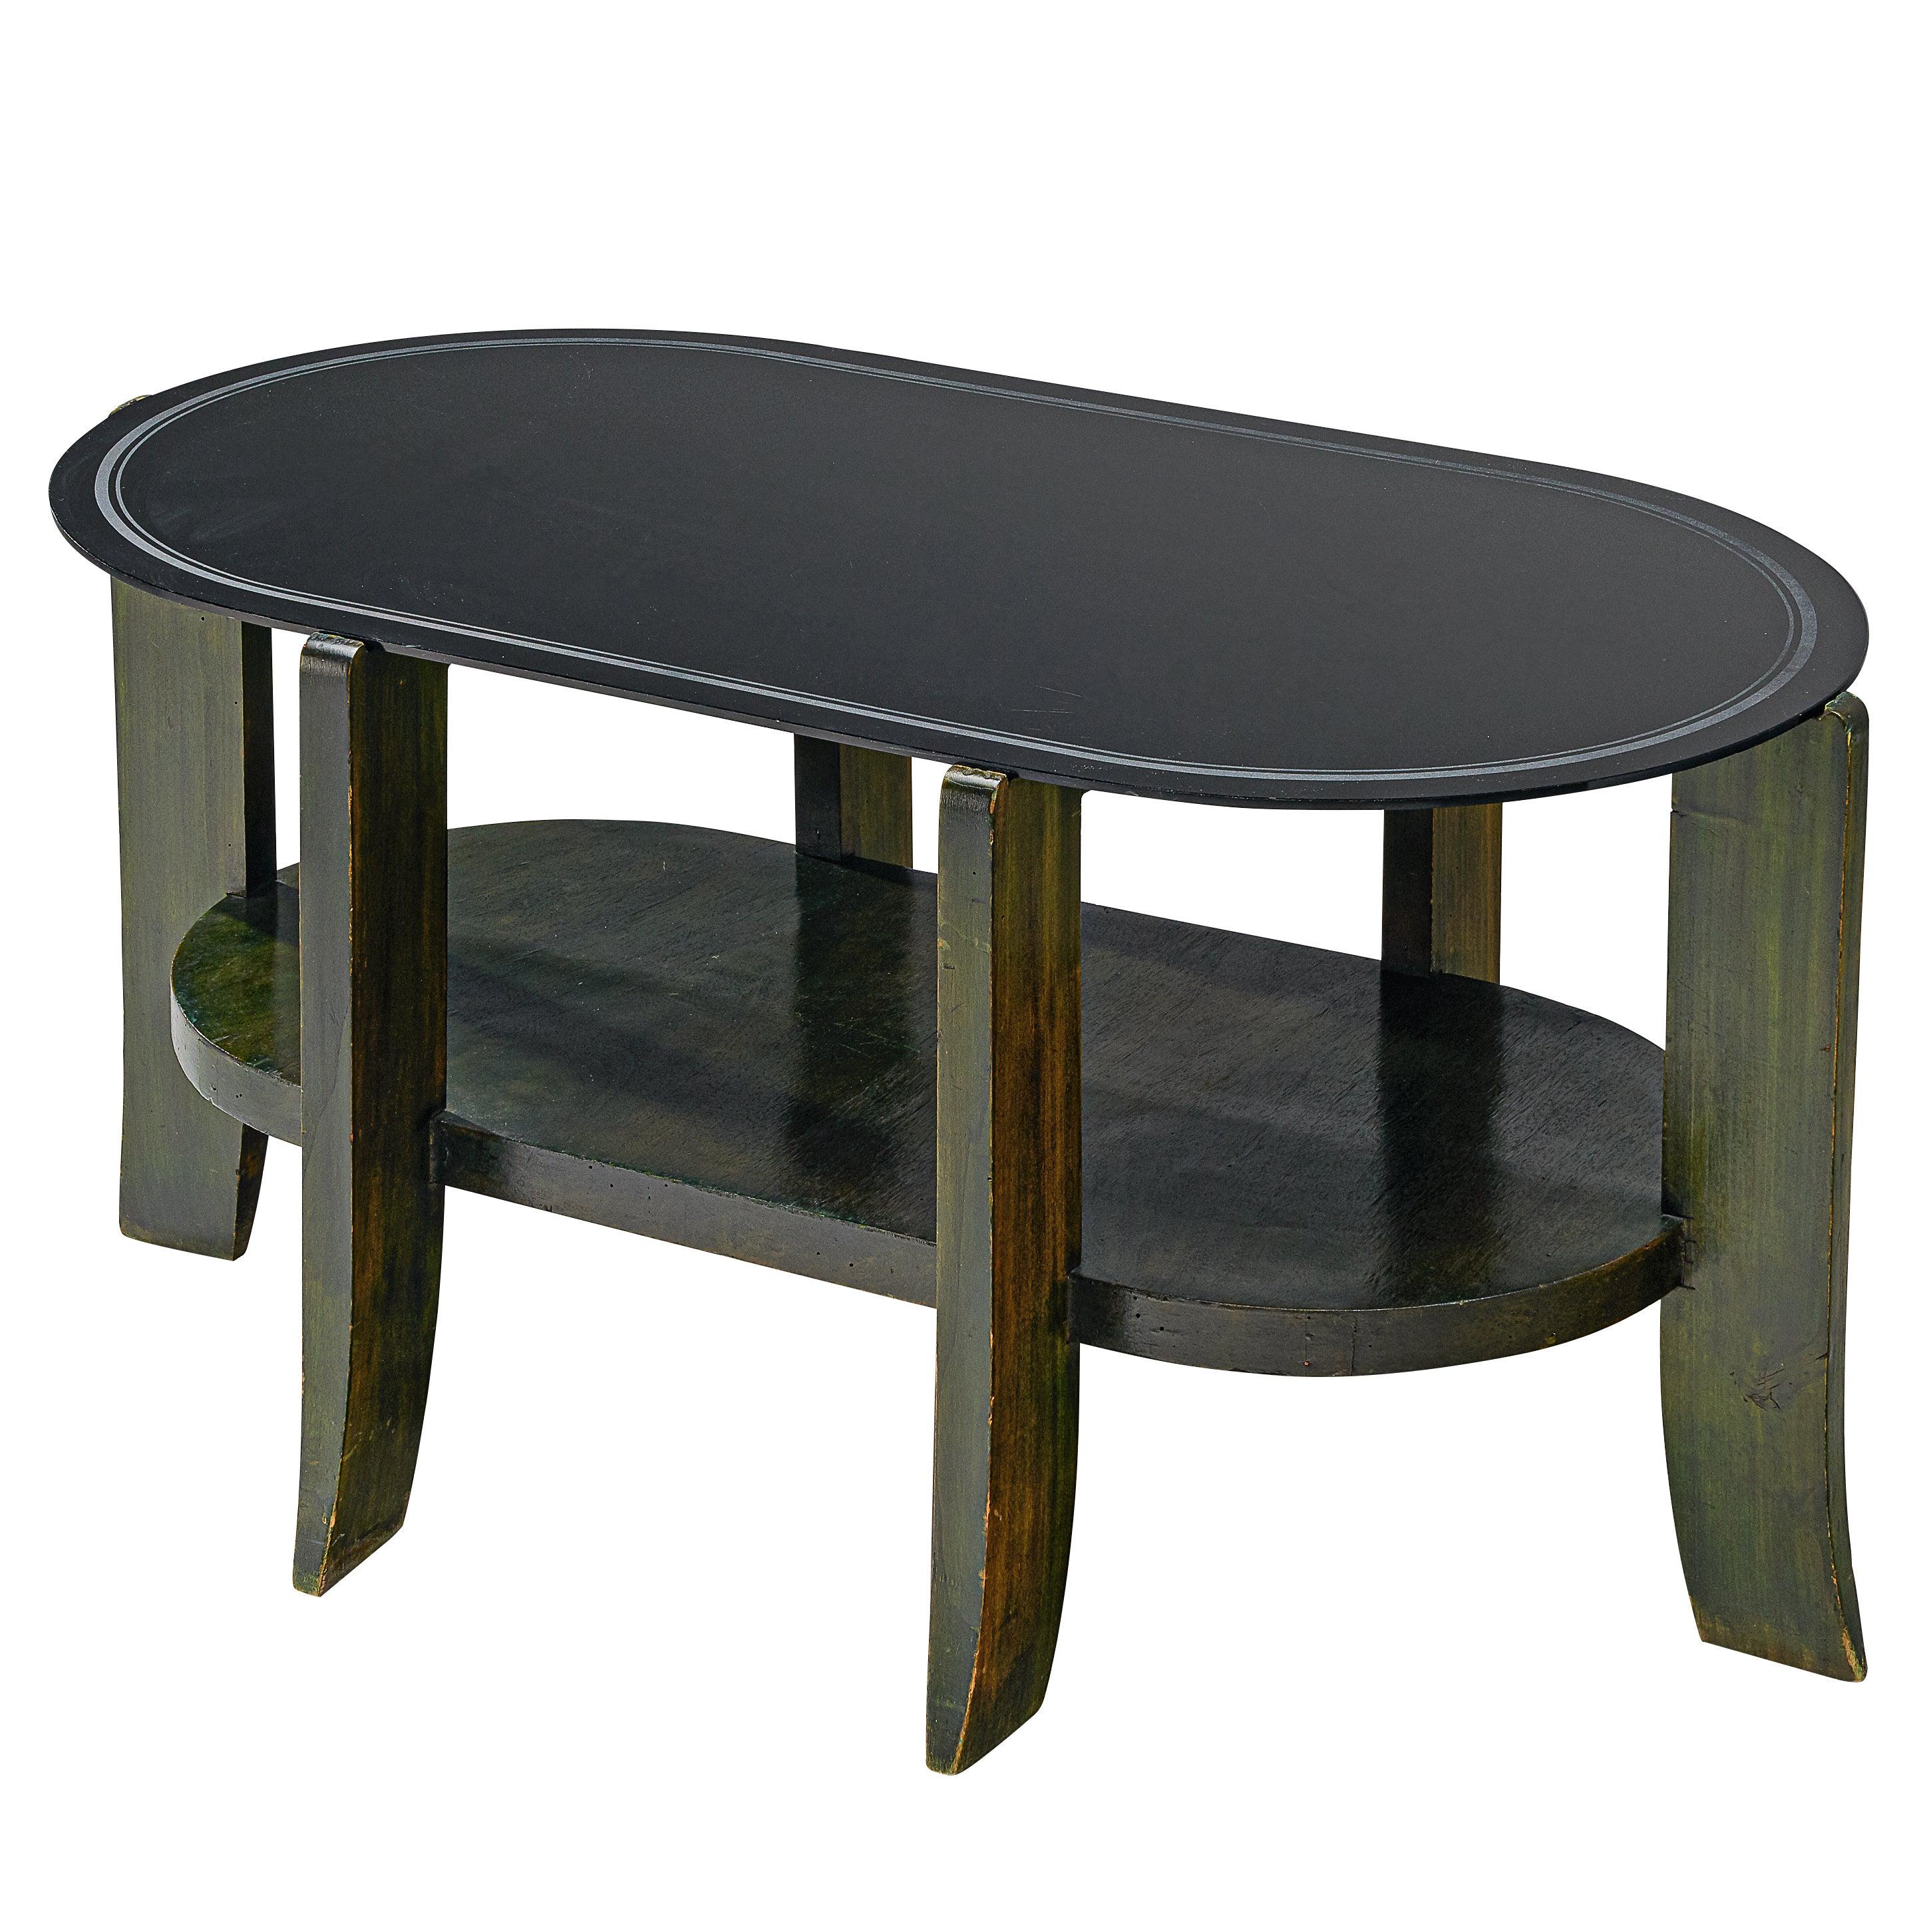 Italian Oval Shaped Coffee Table in Green Stained Wood and Black Glass